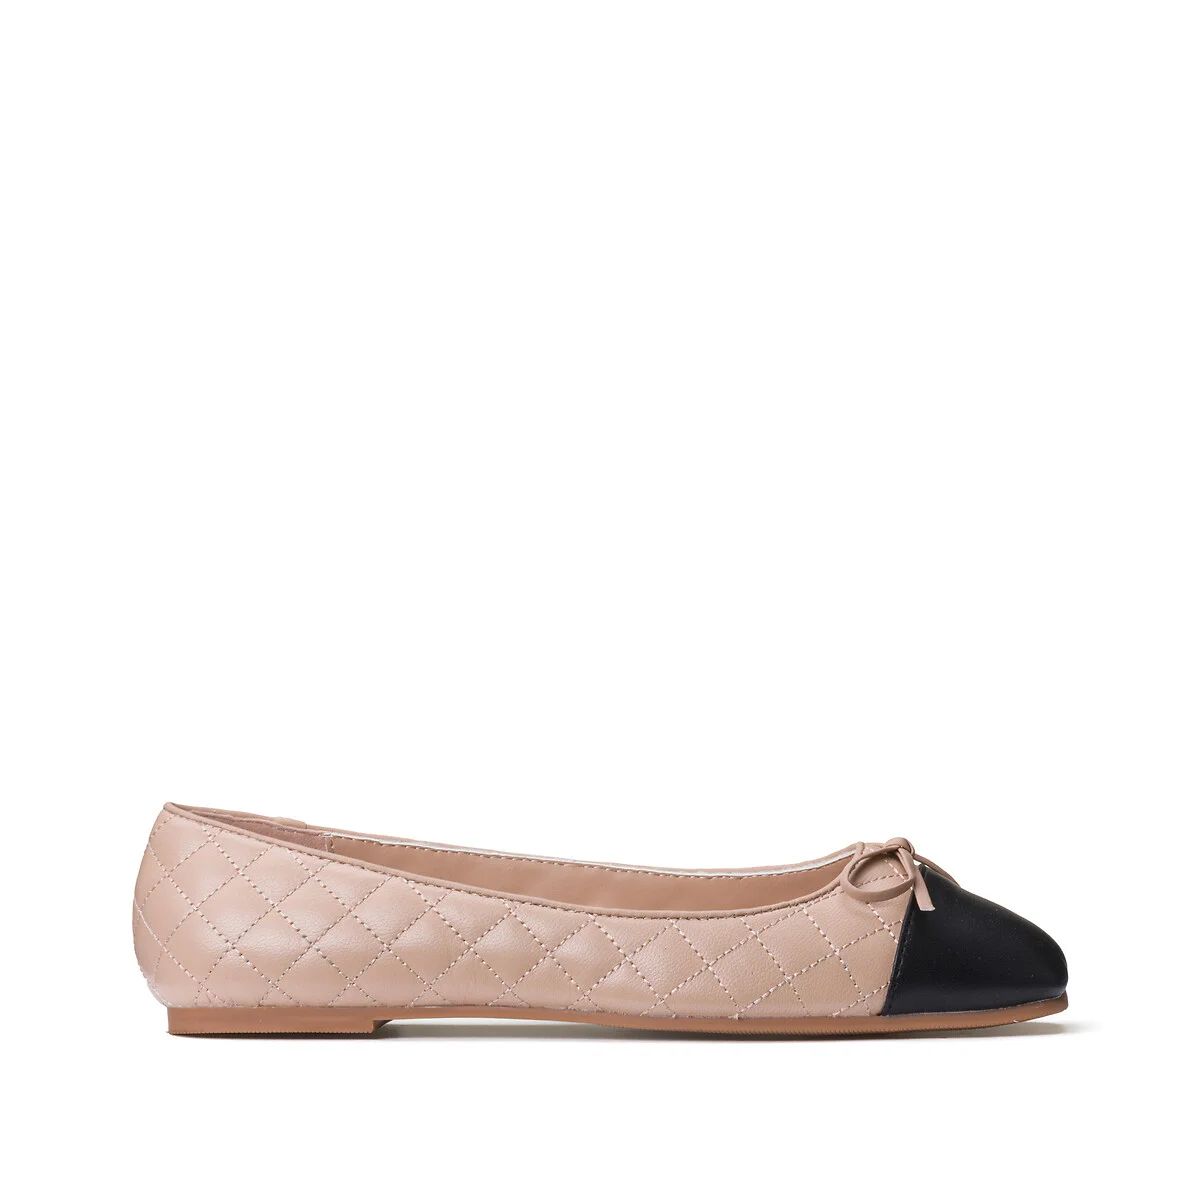 Two-Tone Ballet Flats in Quilted Leather with Flat Heel | La Redoute (UK)